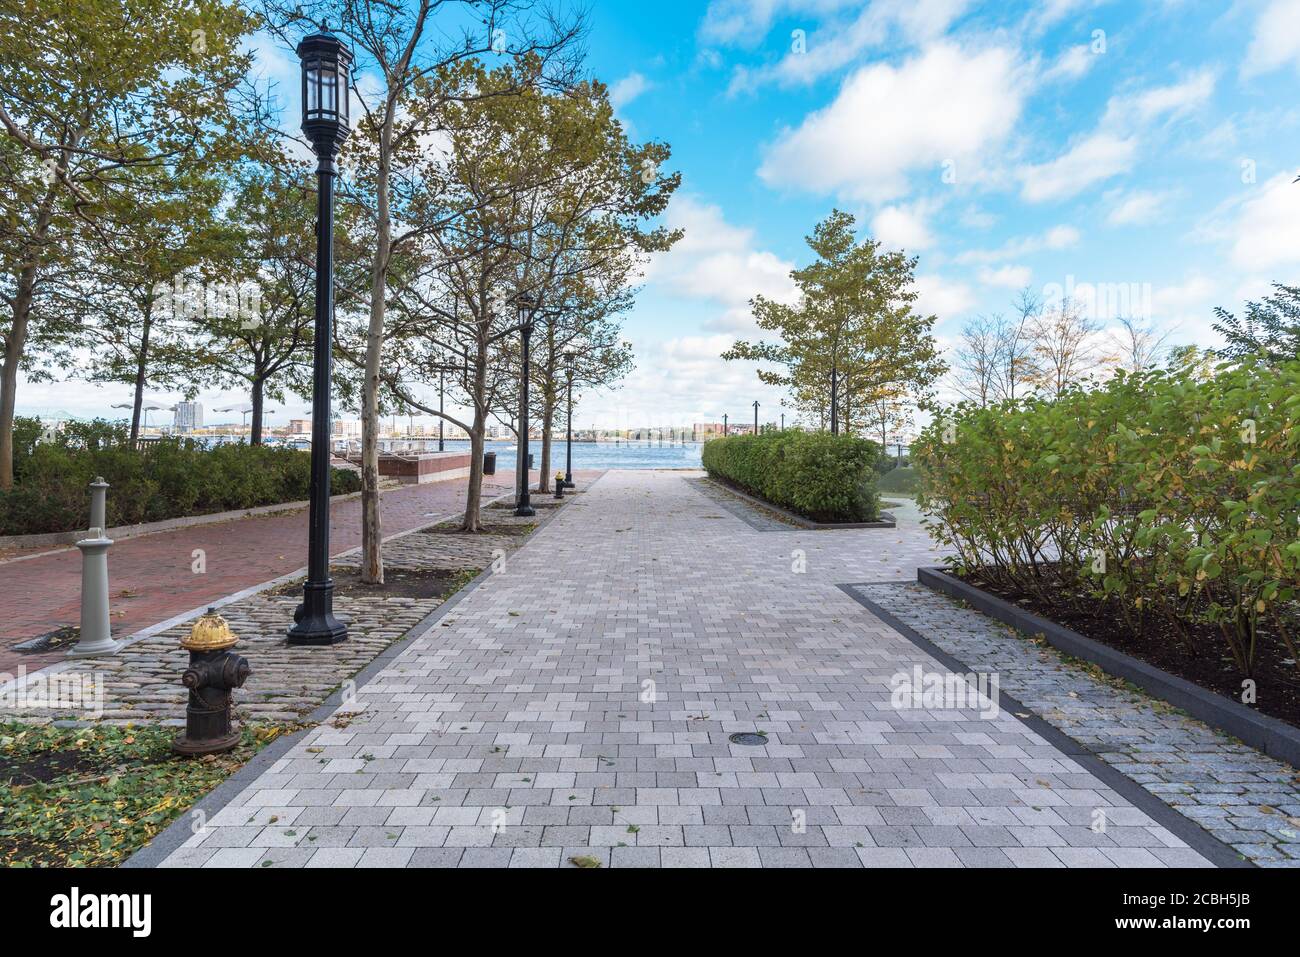 Deserted pedestrian street lined with trees and street lights in a waterfront park on a clear autumn morning Stock Photo